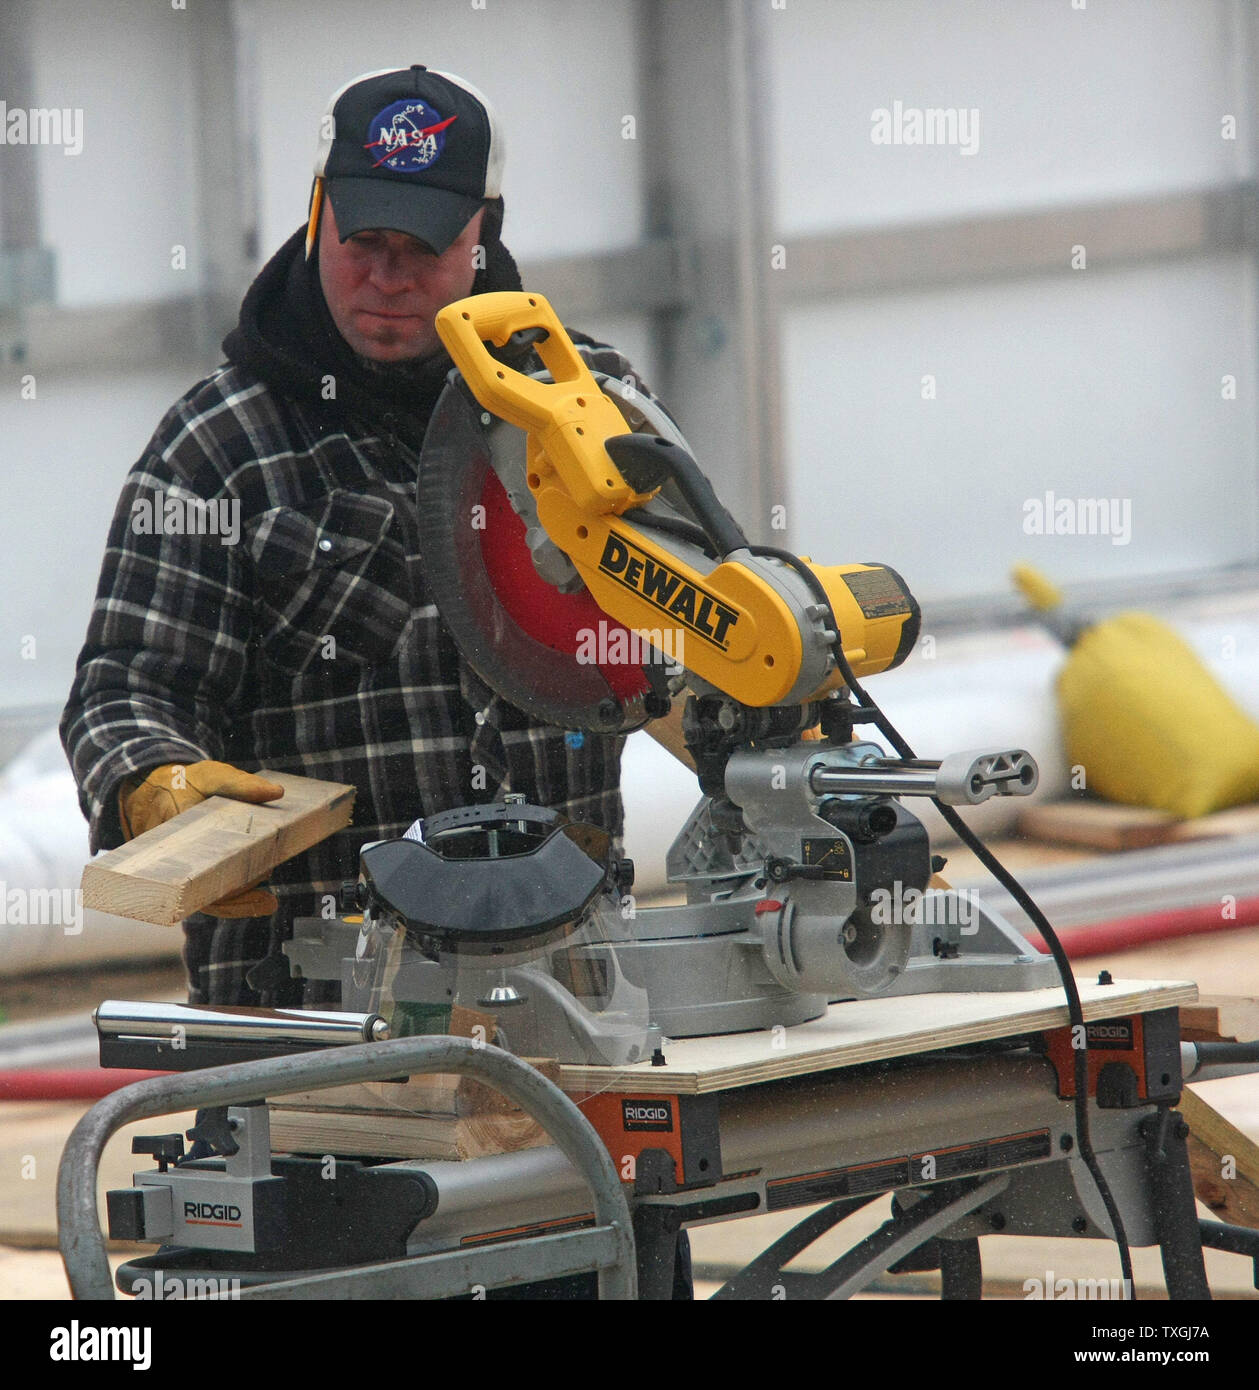 A worker cuts a piece of wood in preparation for the 2008 NHL Winter Classic to be played on January 1, 2008 at Ralph Wilson Stadium in Orchard Park, New York on December 29, 2007. (UPI Photo/Jerome Davis). Stock Photo